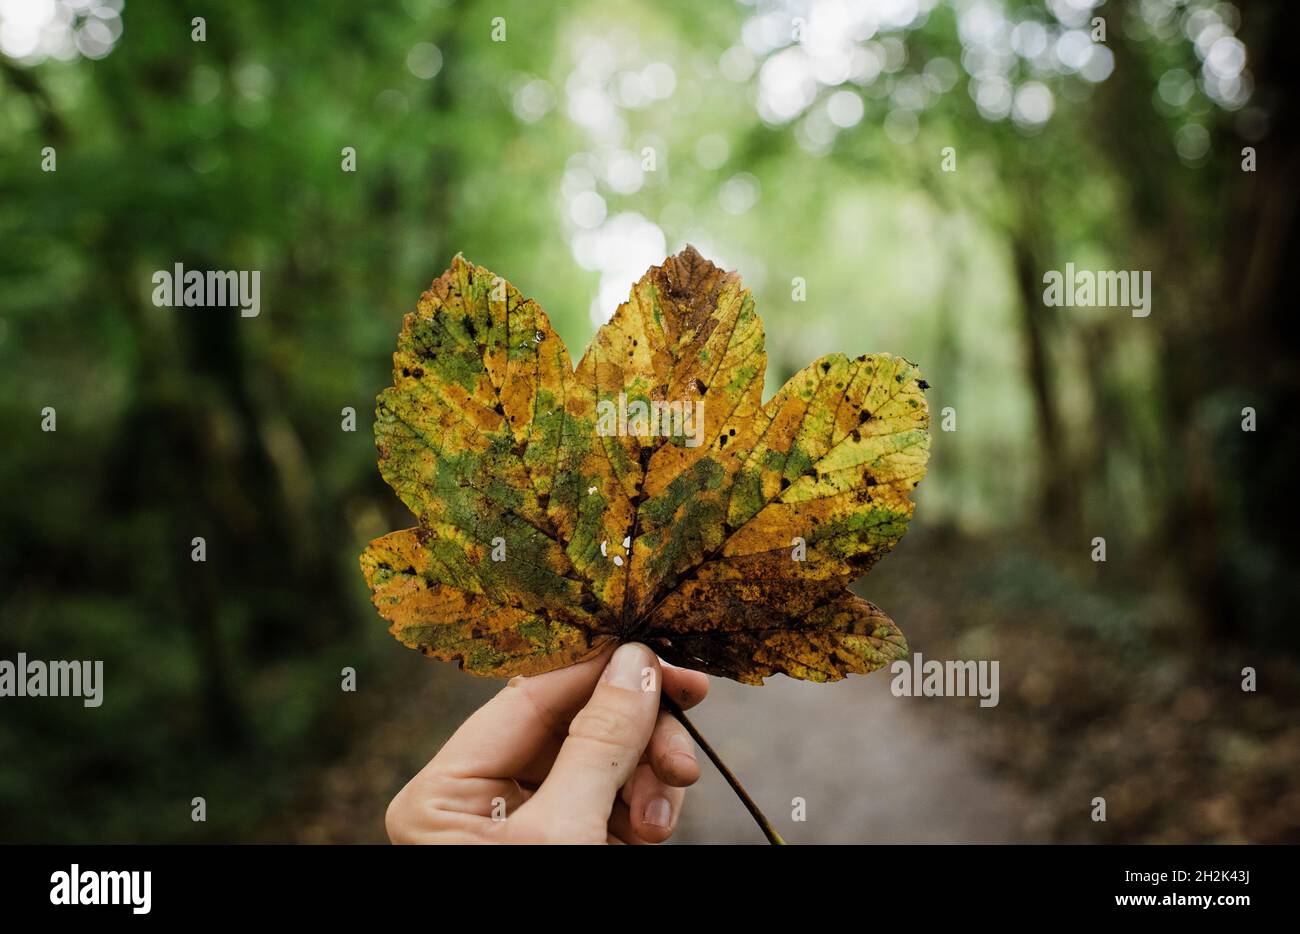 hand holding a changing leaf in a forest in autumn Stock Photo